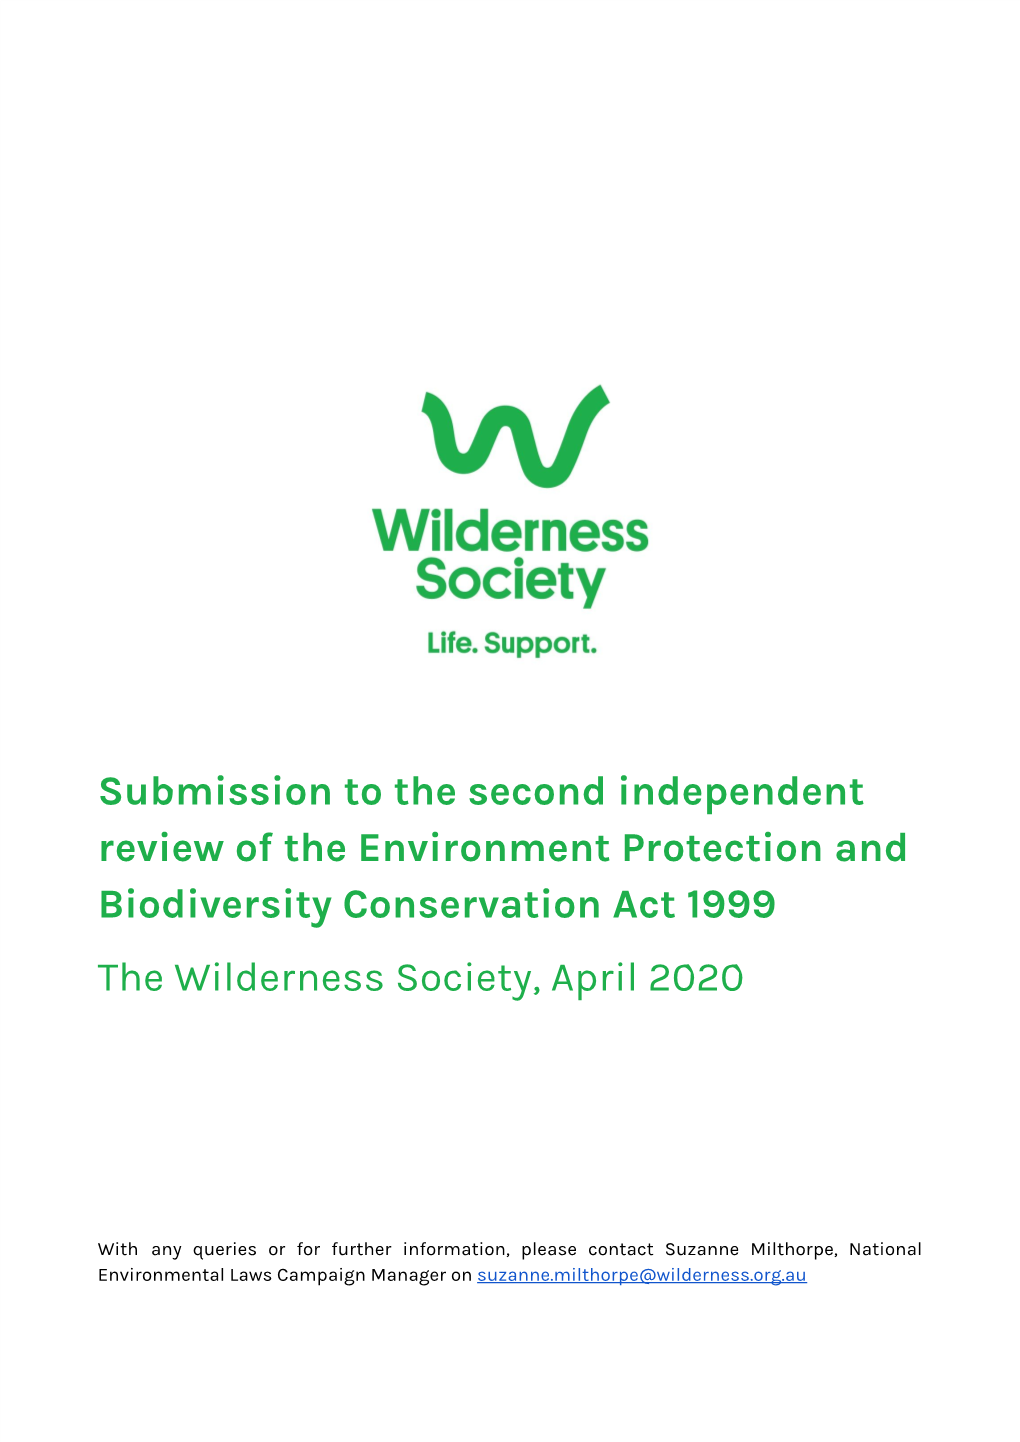 Submission to the Second Independent Review of the Environment Protection and Biodiversity Conservation Act 1999 the Wilderness Society, April 2020